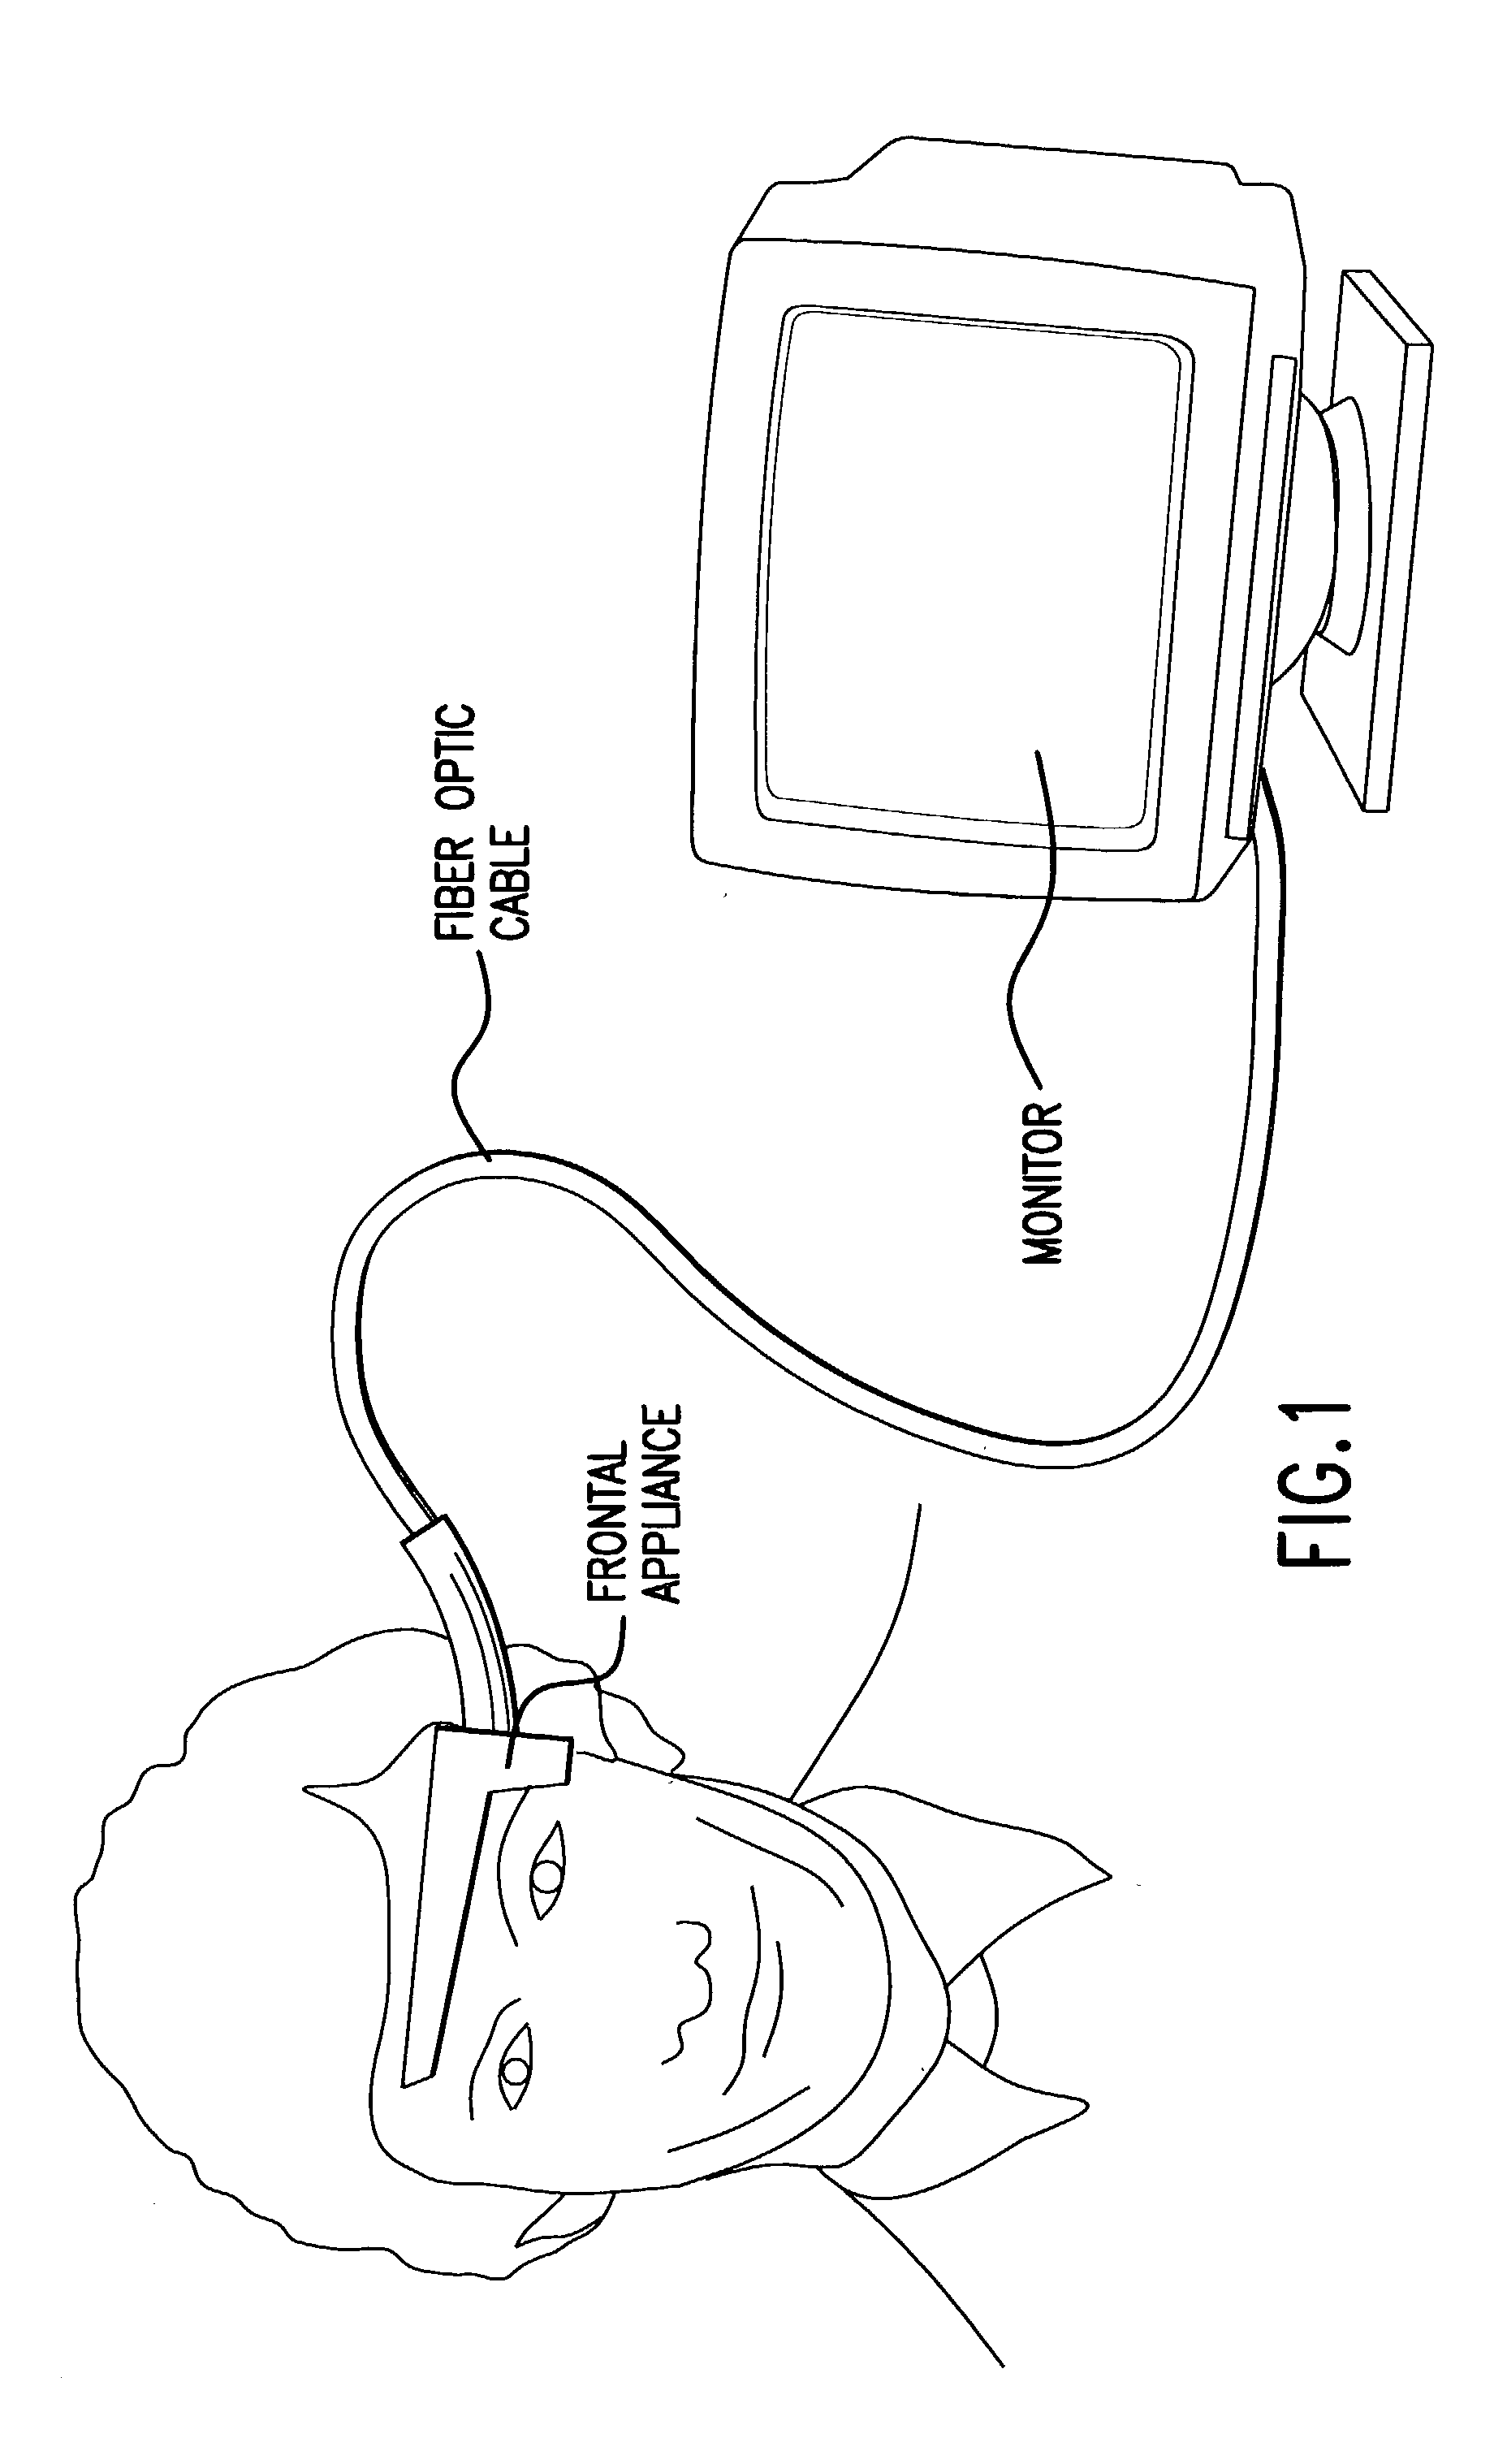 Fiber optic power source for an electroencephalograph acquisition apparatus